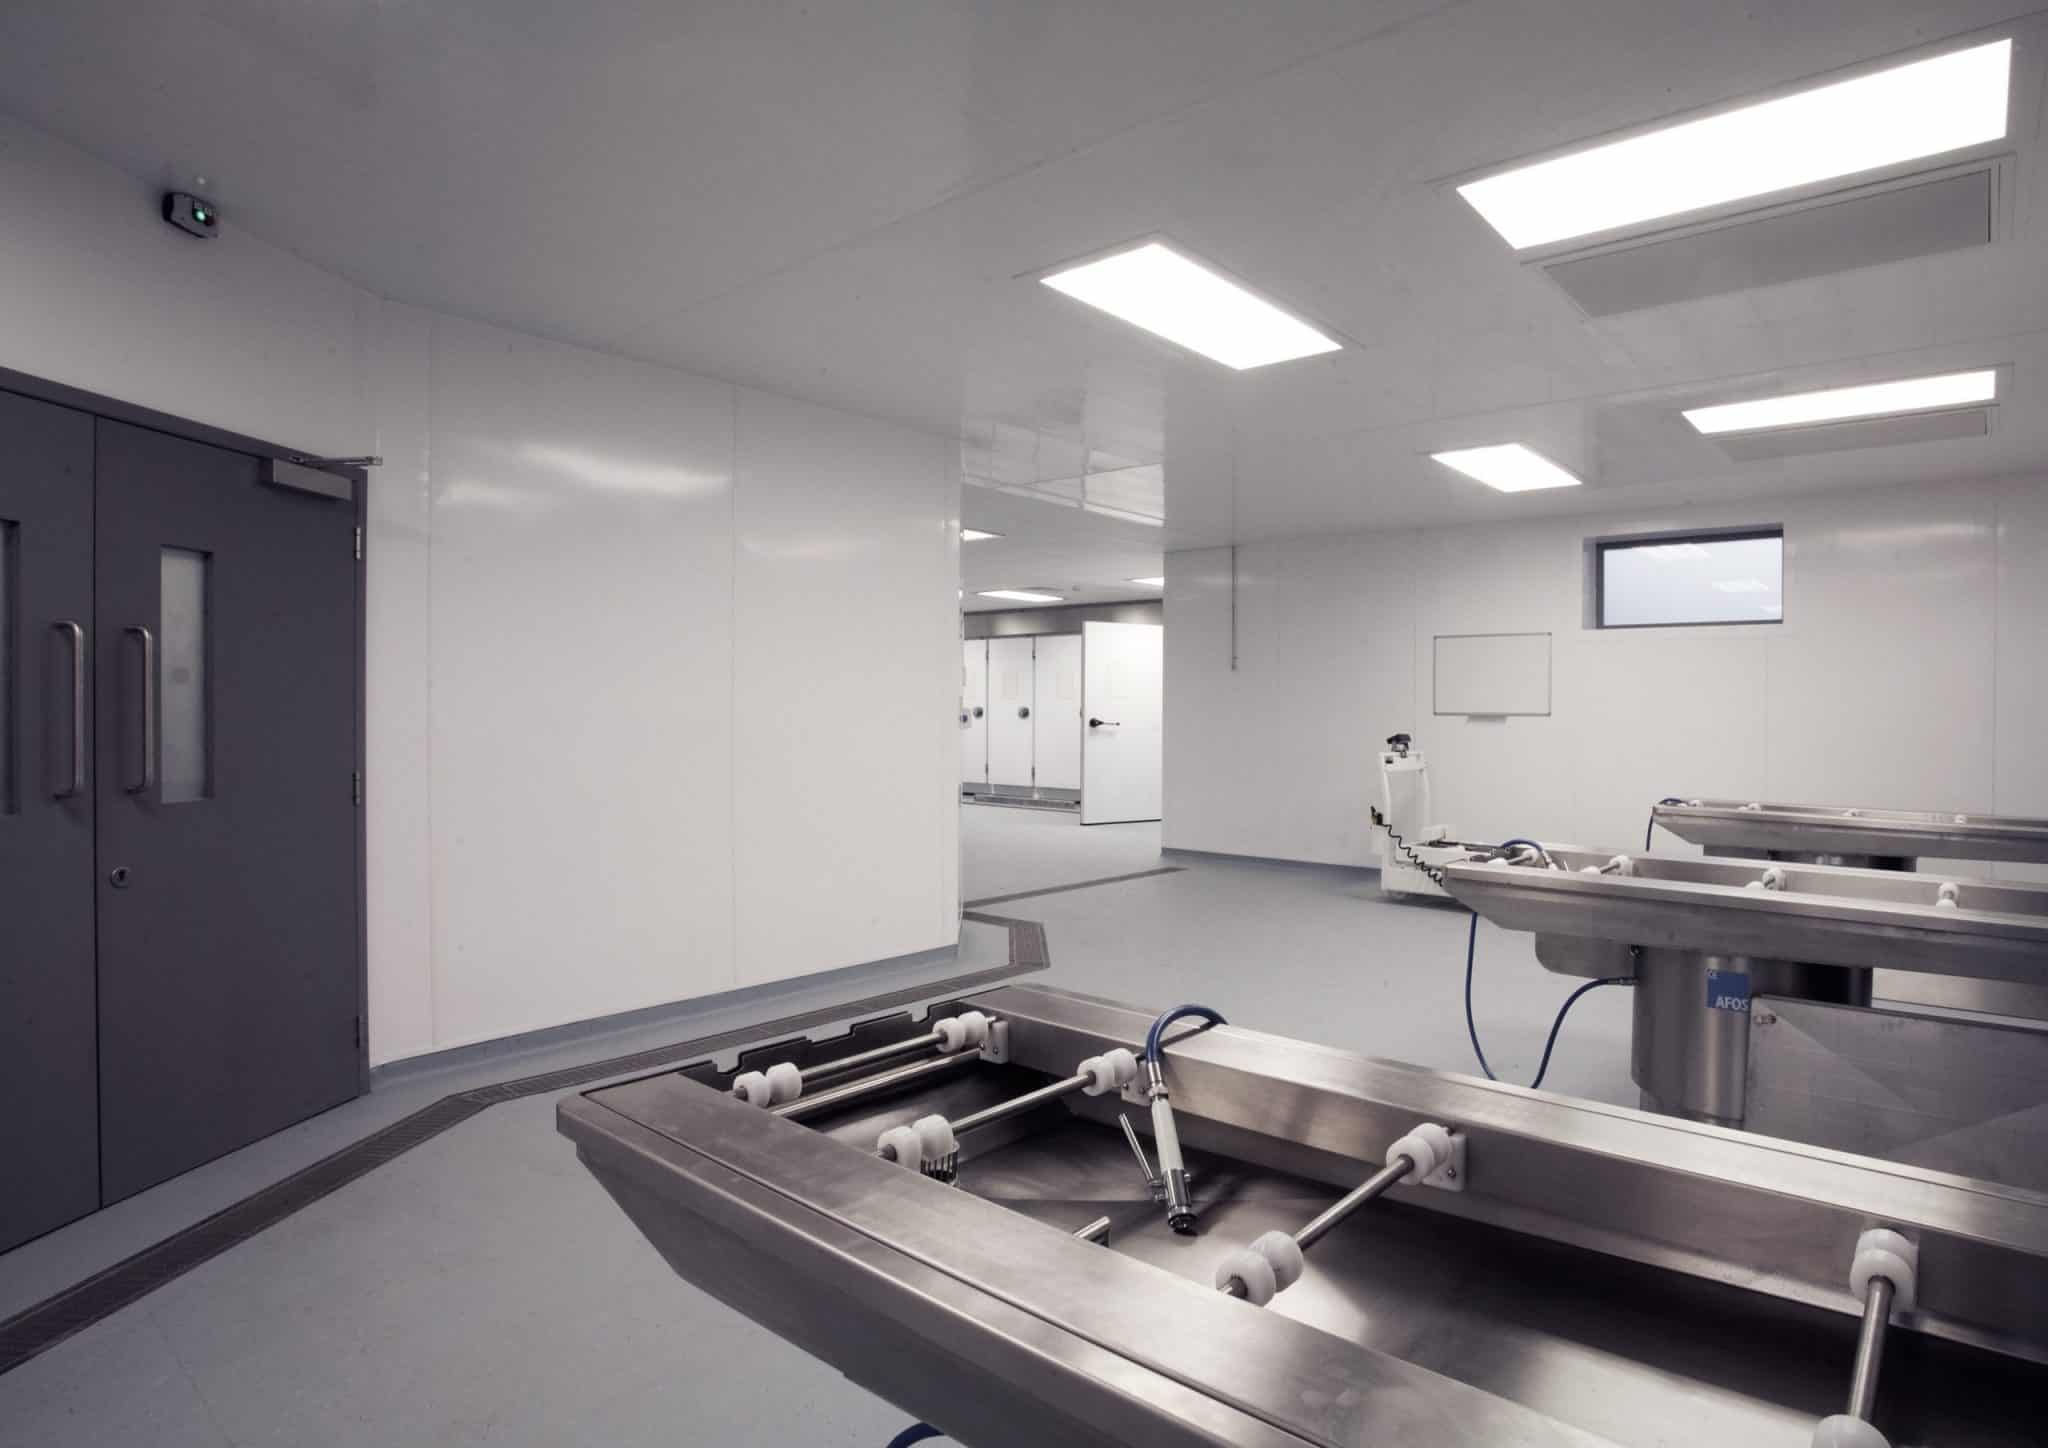 HYGIENIC WALL CLADDING FOR HOSPITALS